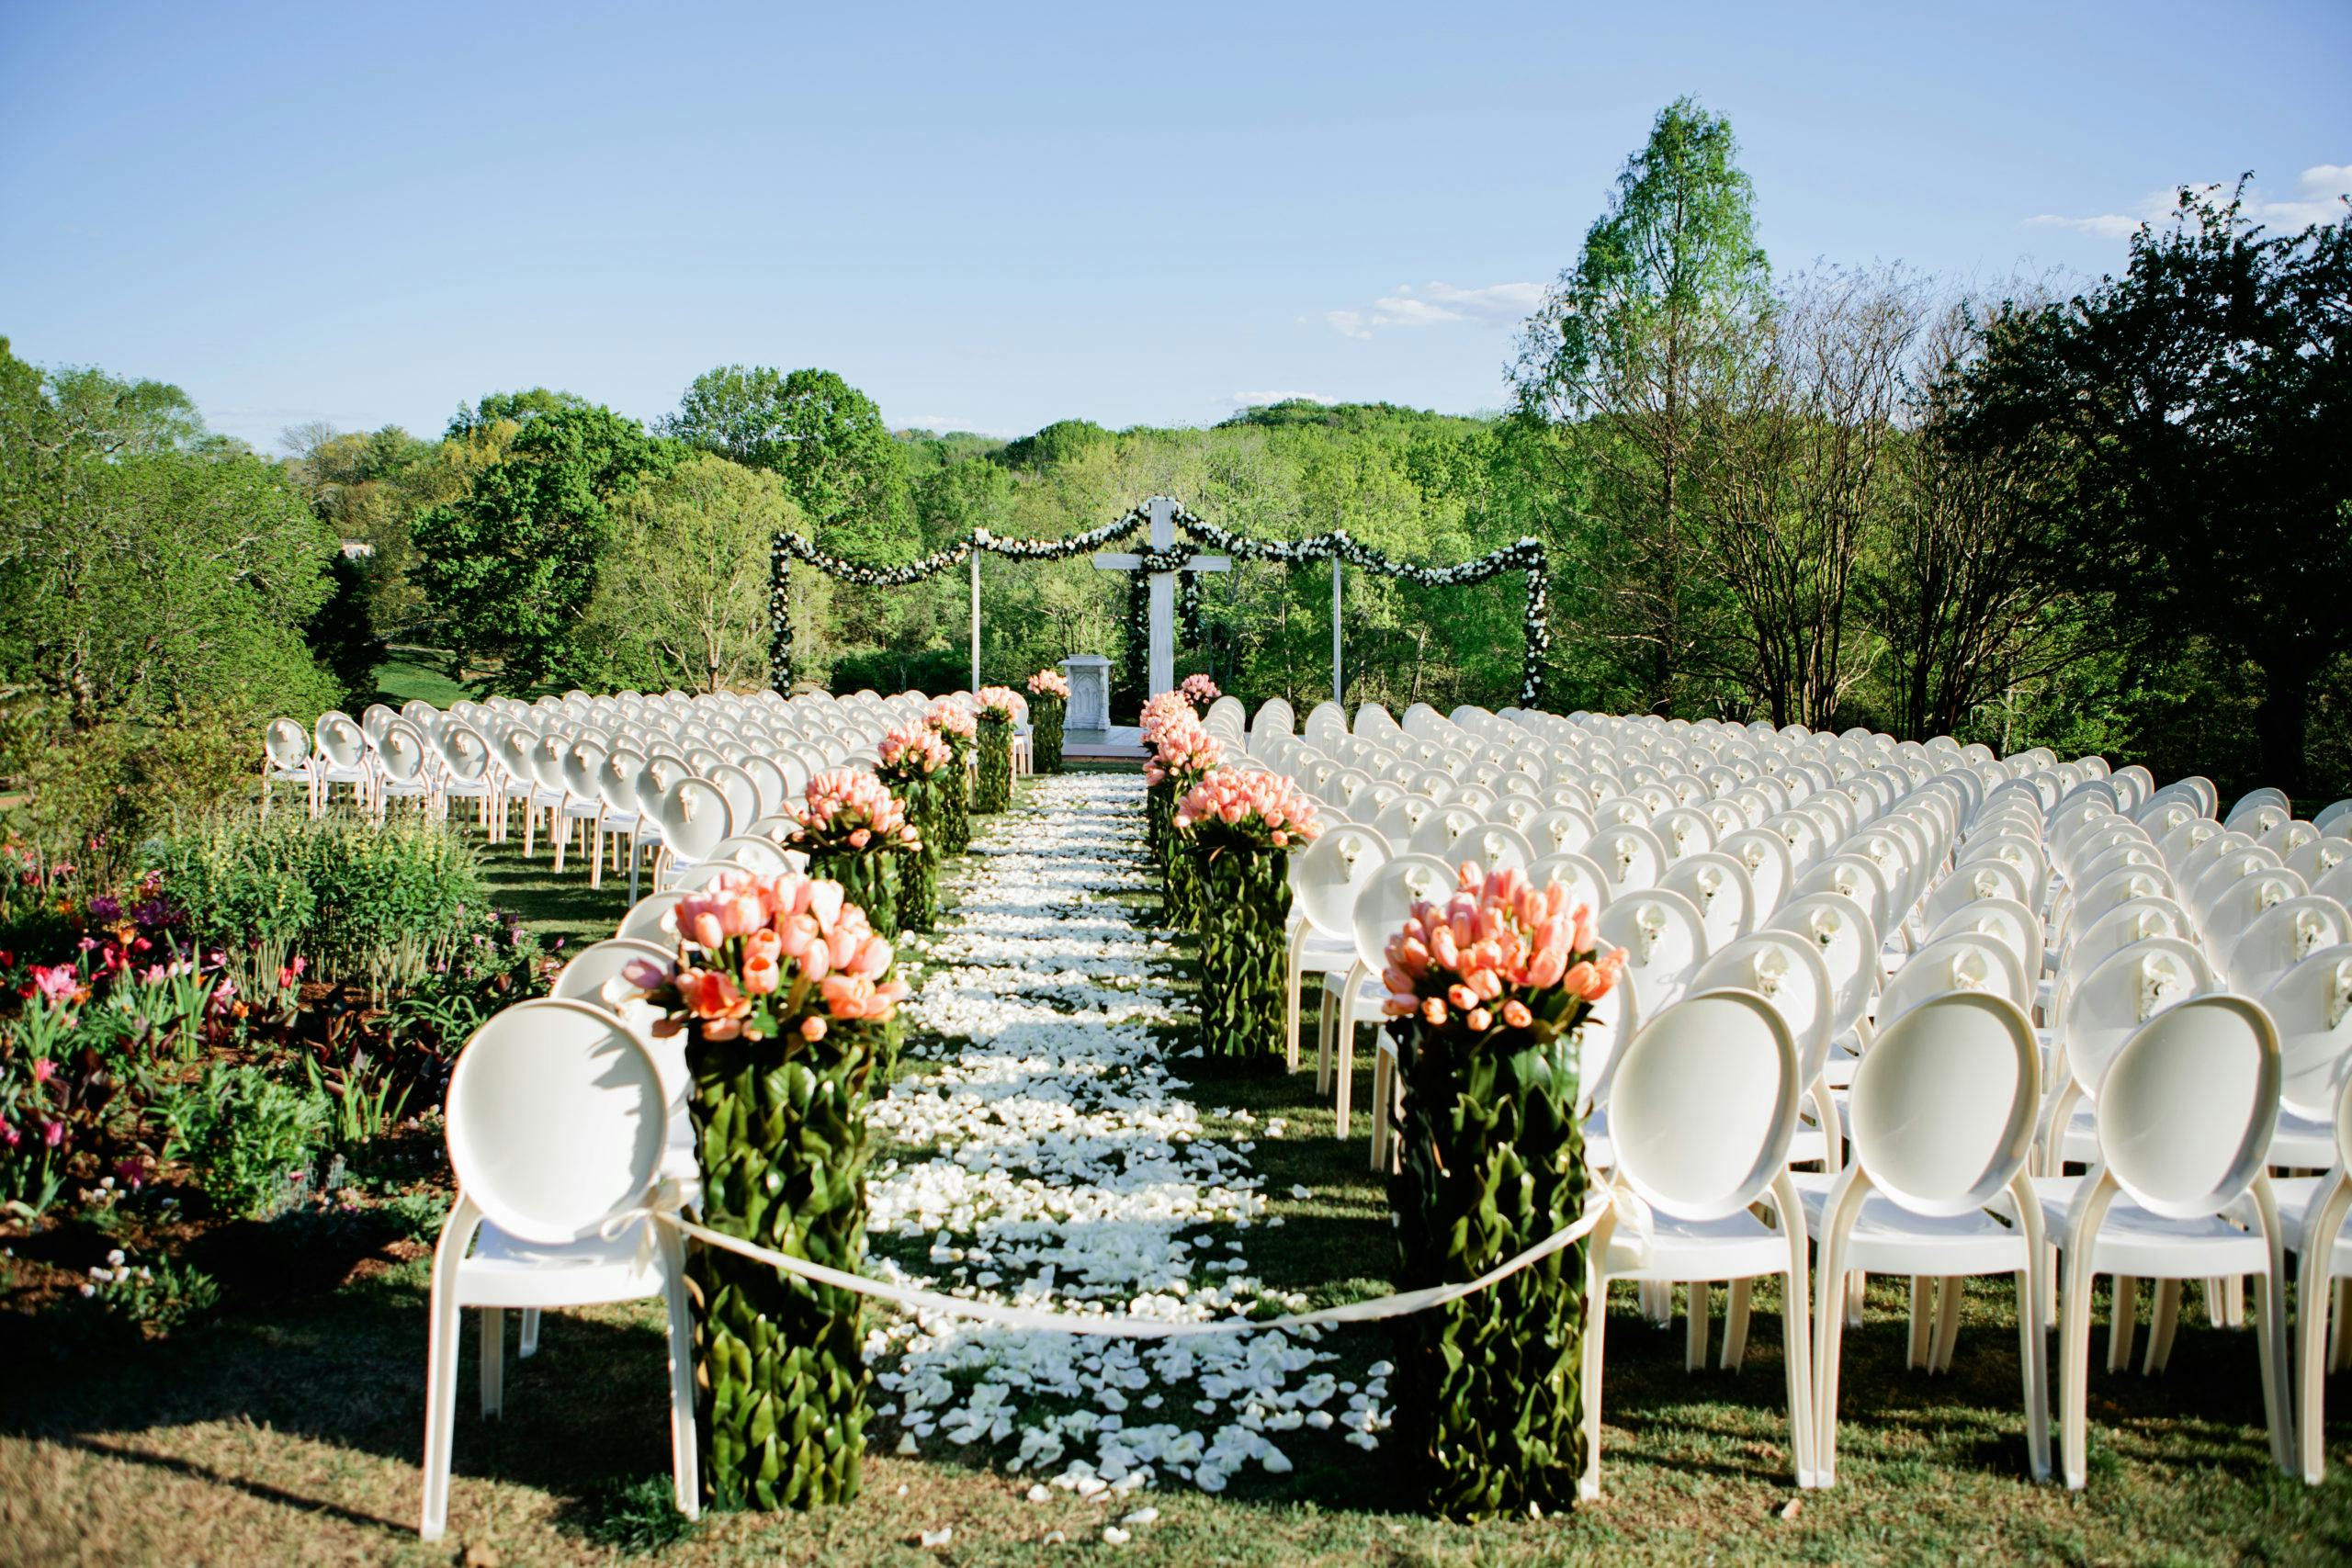 Clover Park  Corporate Events, Wedding Locations, Event Spaces and Party  Venues.